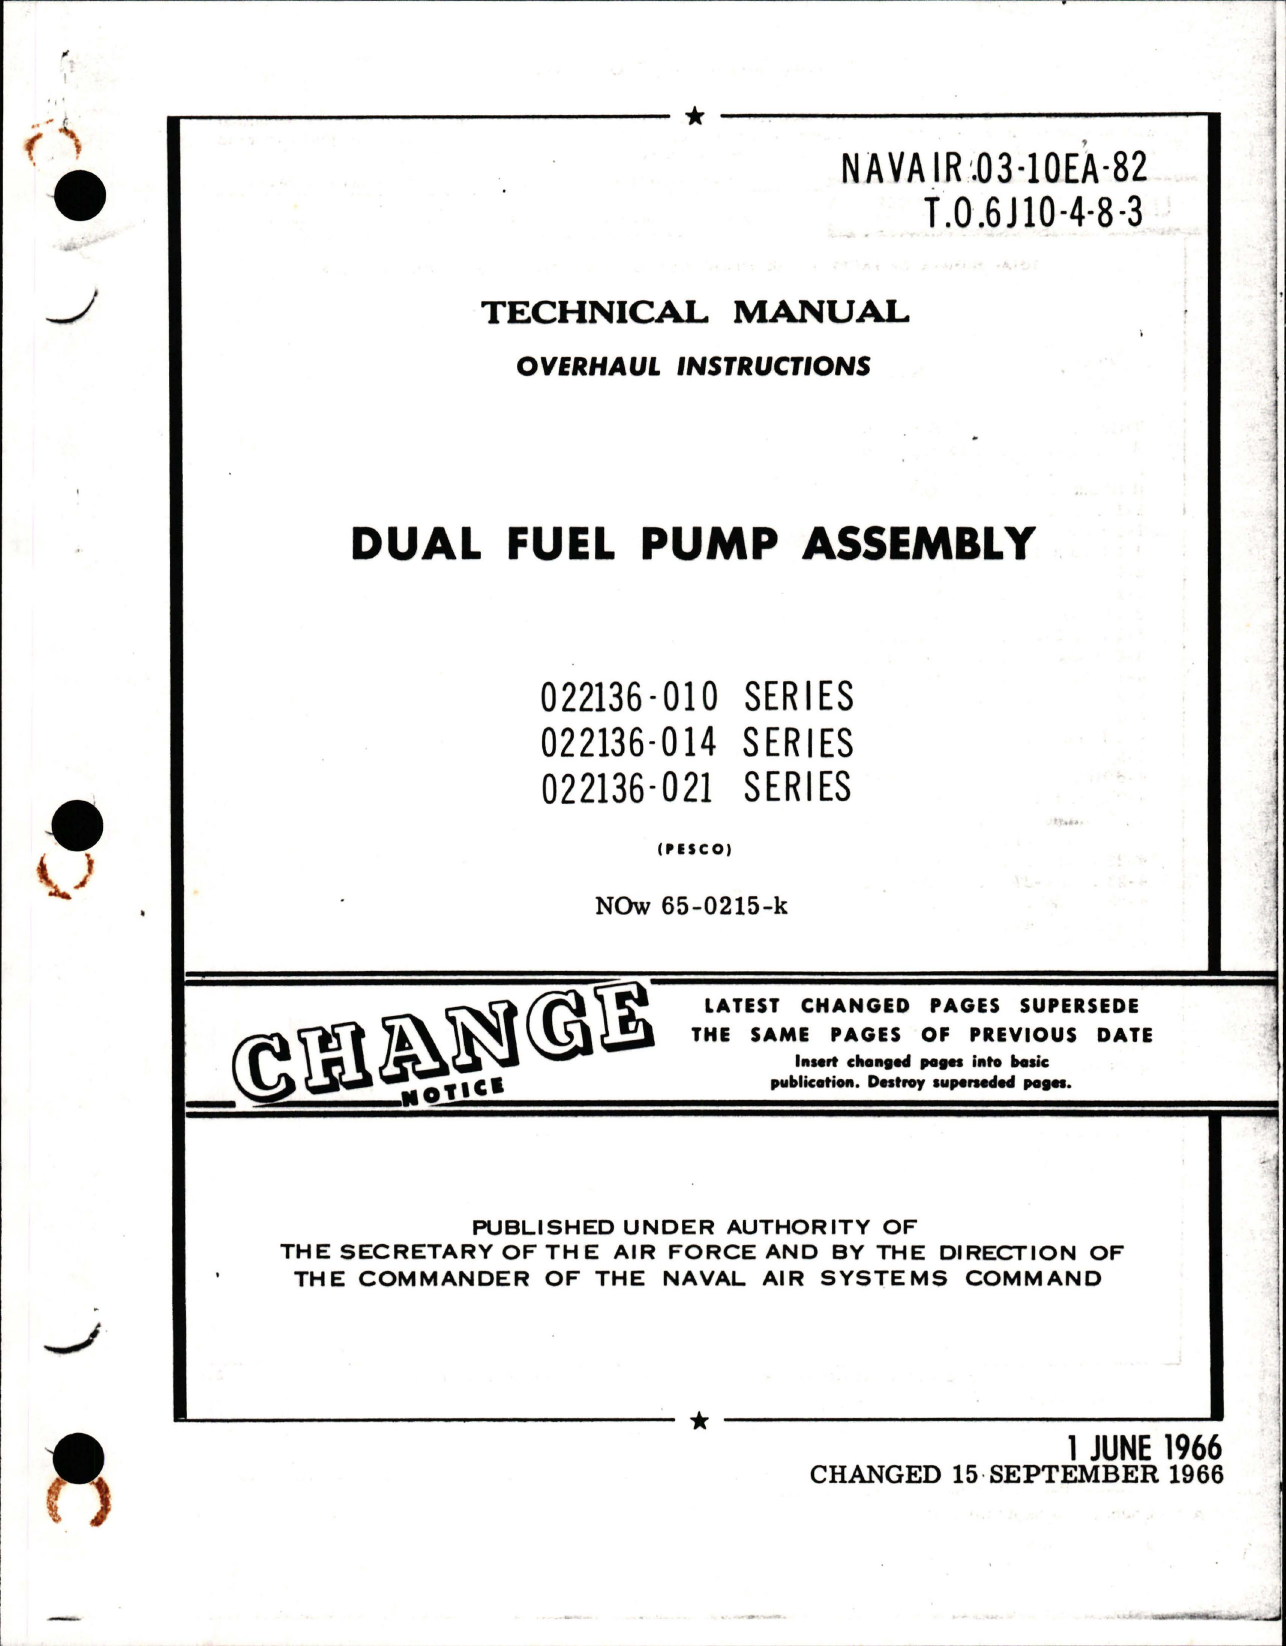 Sample page 1 from AirCorps Library document: Overhaul Instructions for Dual Fuel Pump Assembly - 022136-010, 022136-014, and 022136-021 Series